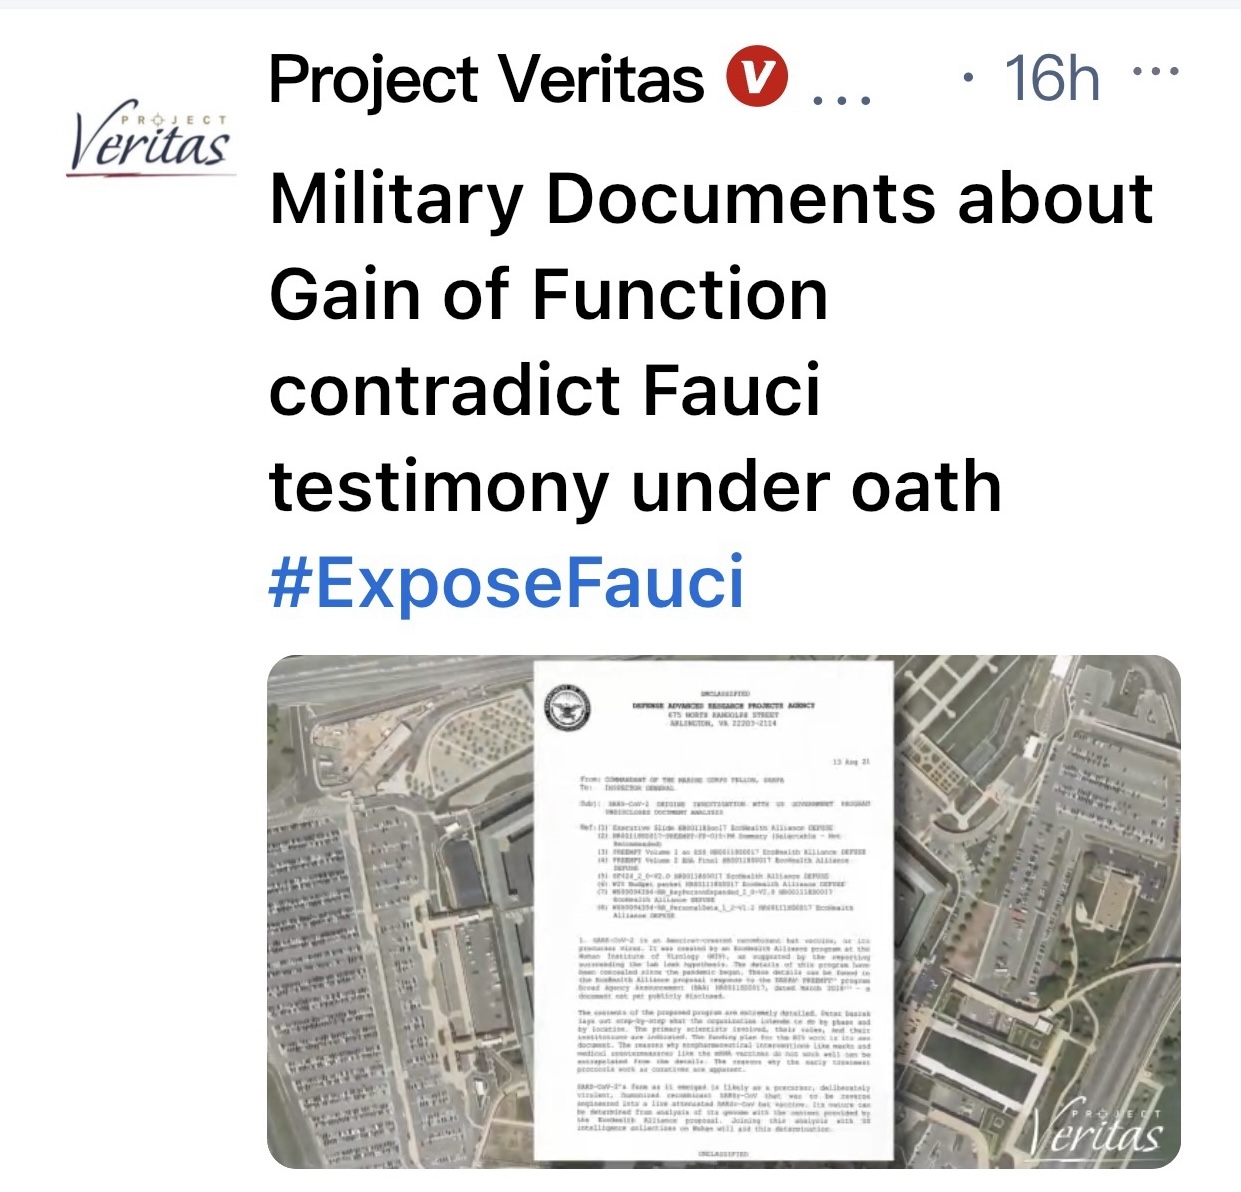 Project Veritas: Gain of Function Docs contradict Fauci testimony under oath